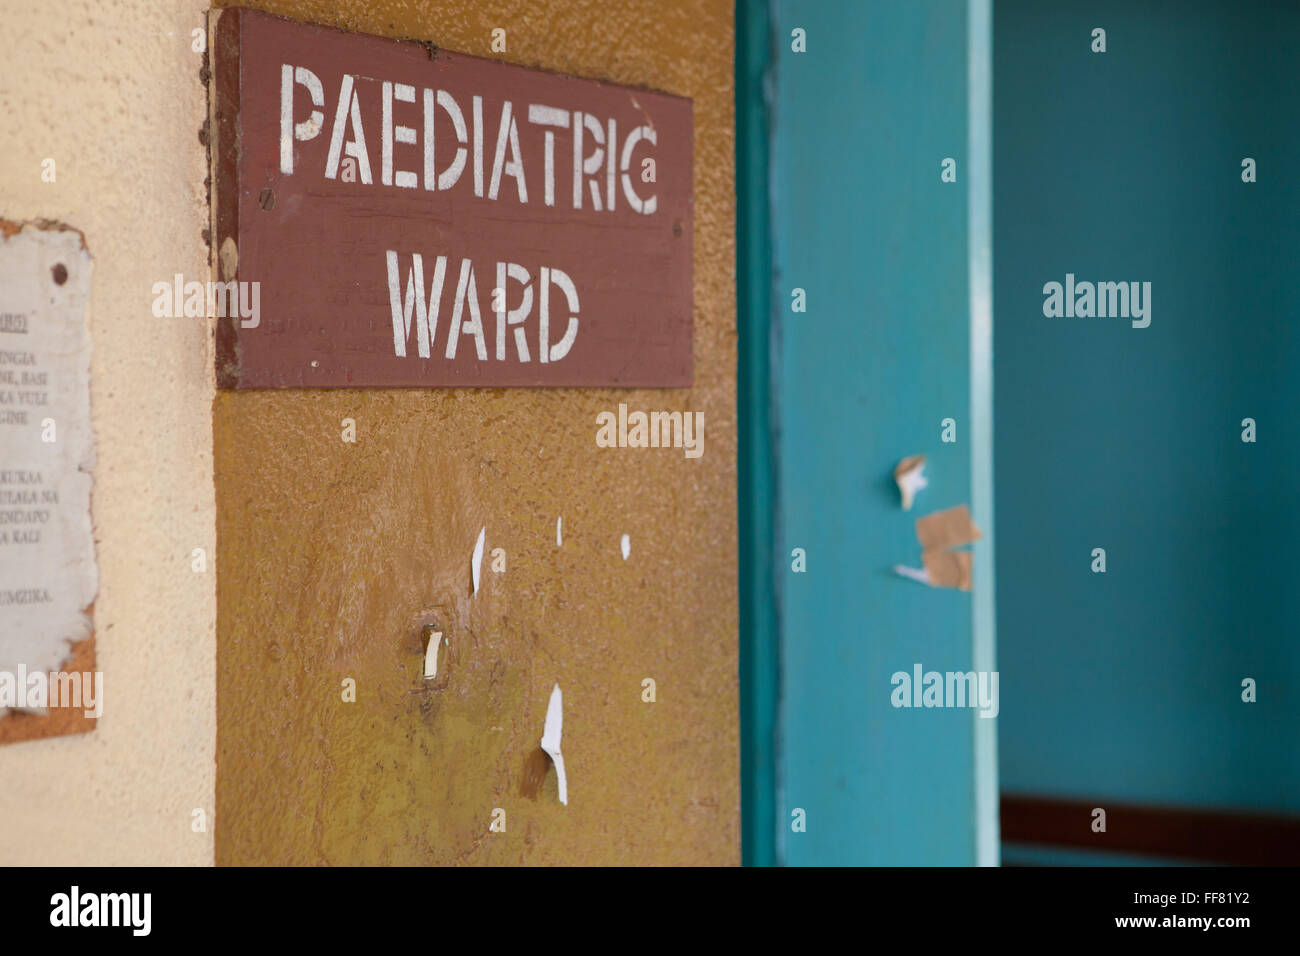 The sign for the Paediatric ward at St.Francis Hospital, Ifakara. Stock Photo